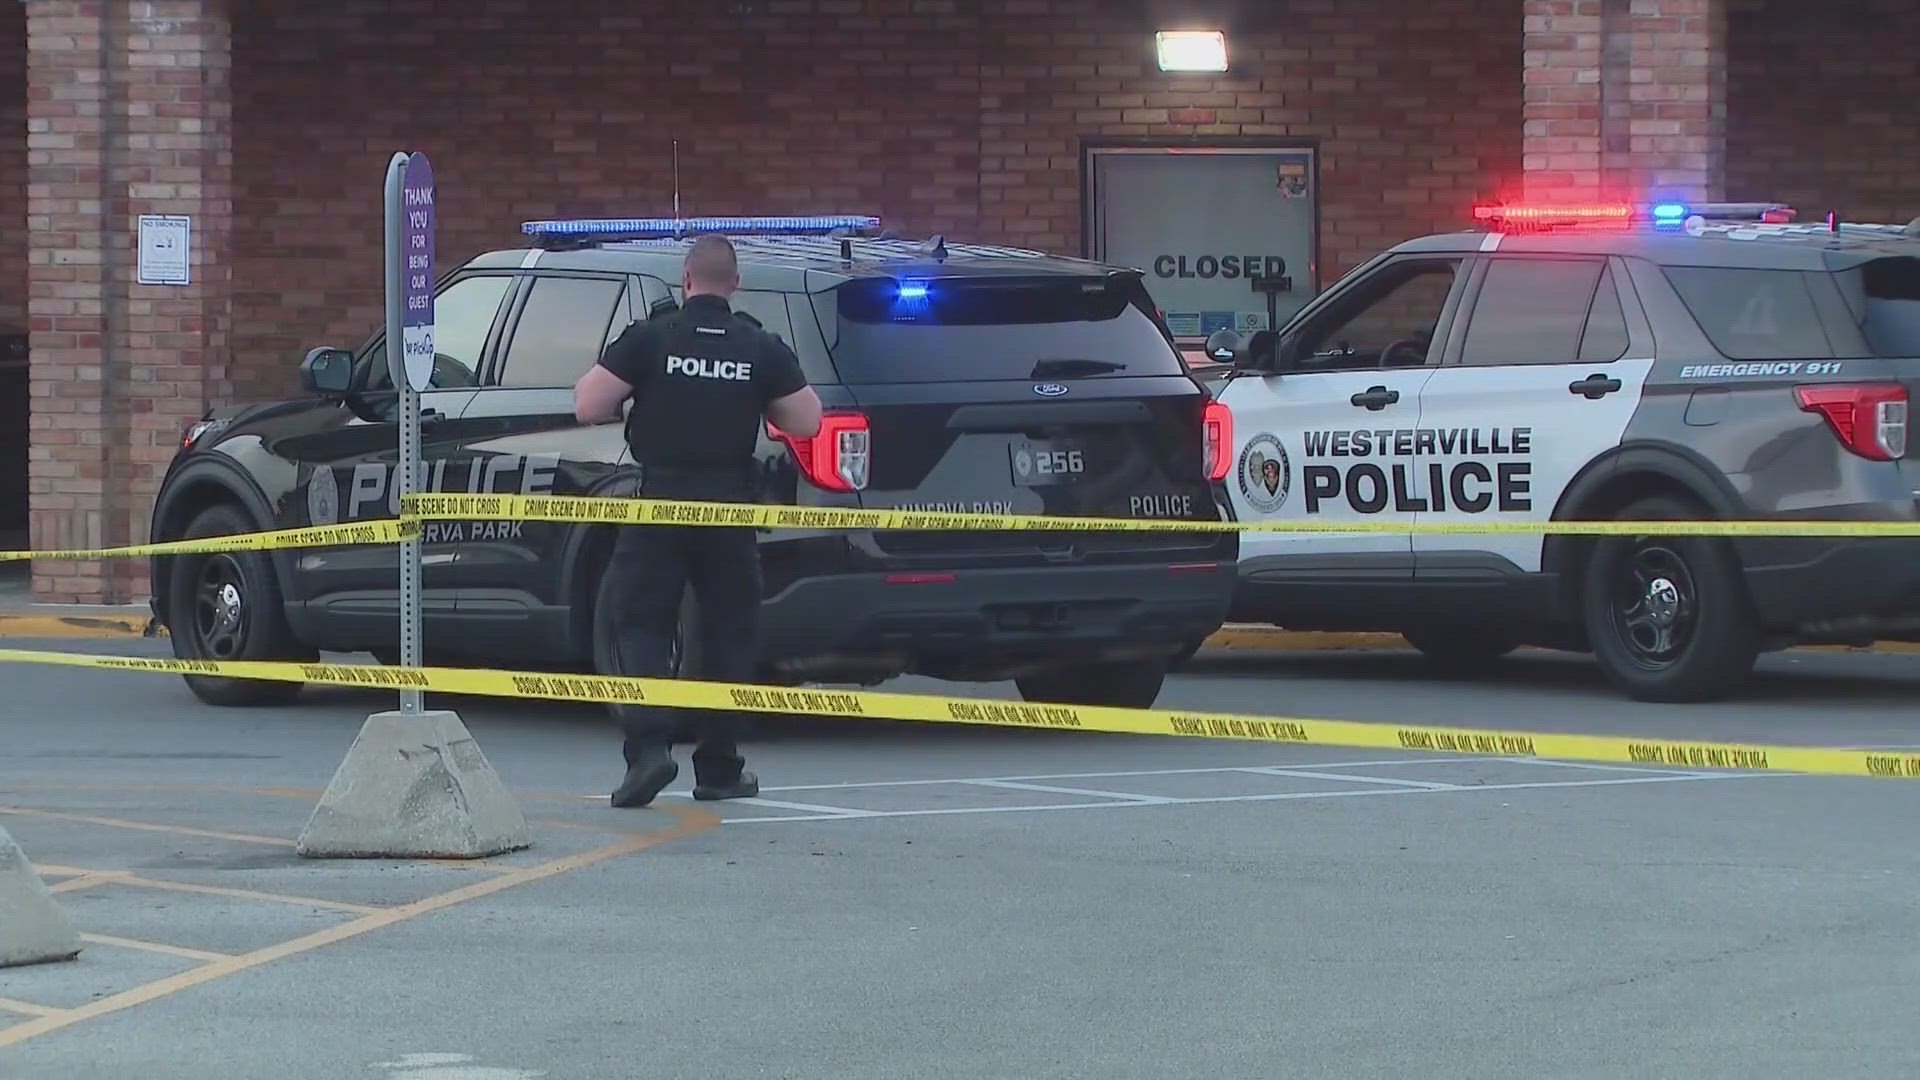 The Franklin County Coroner's Office confirmed that a pregnant woman was killed in a shooting involving an officer outside of a Kroger in Blendon Township.